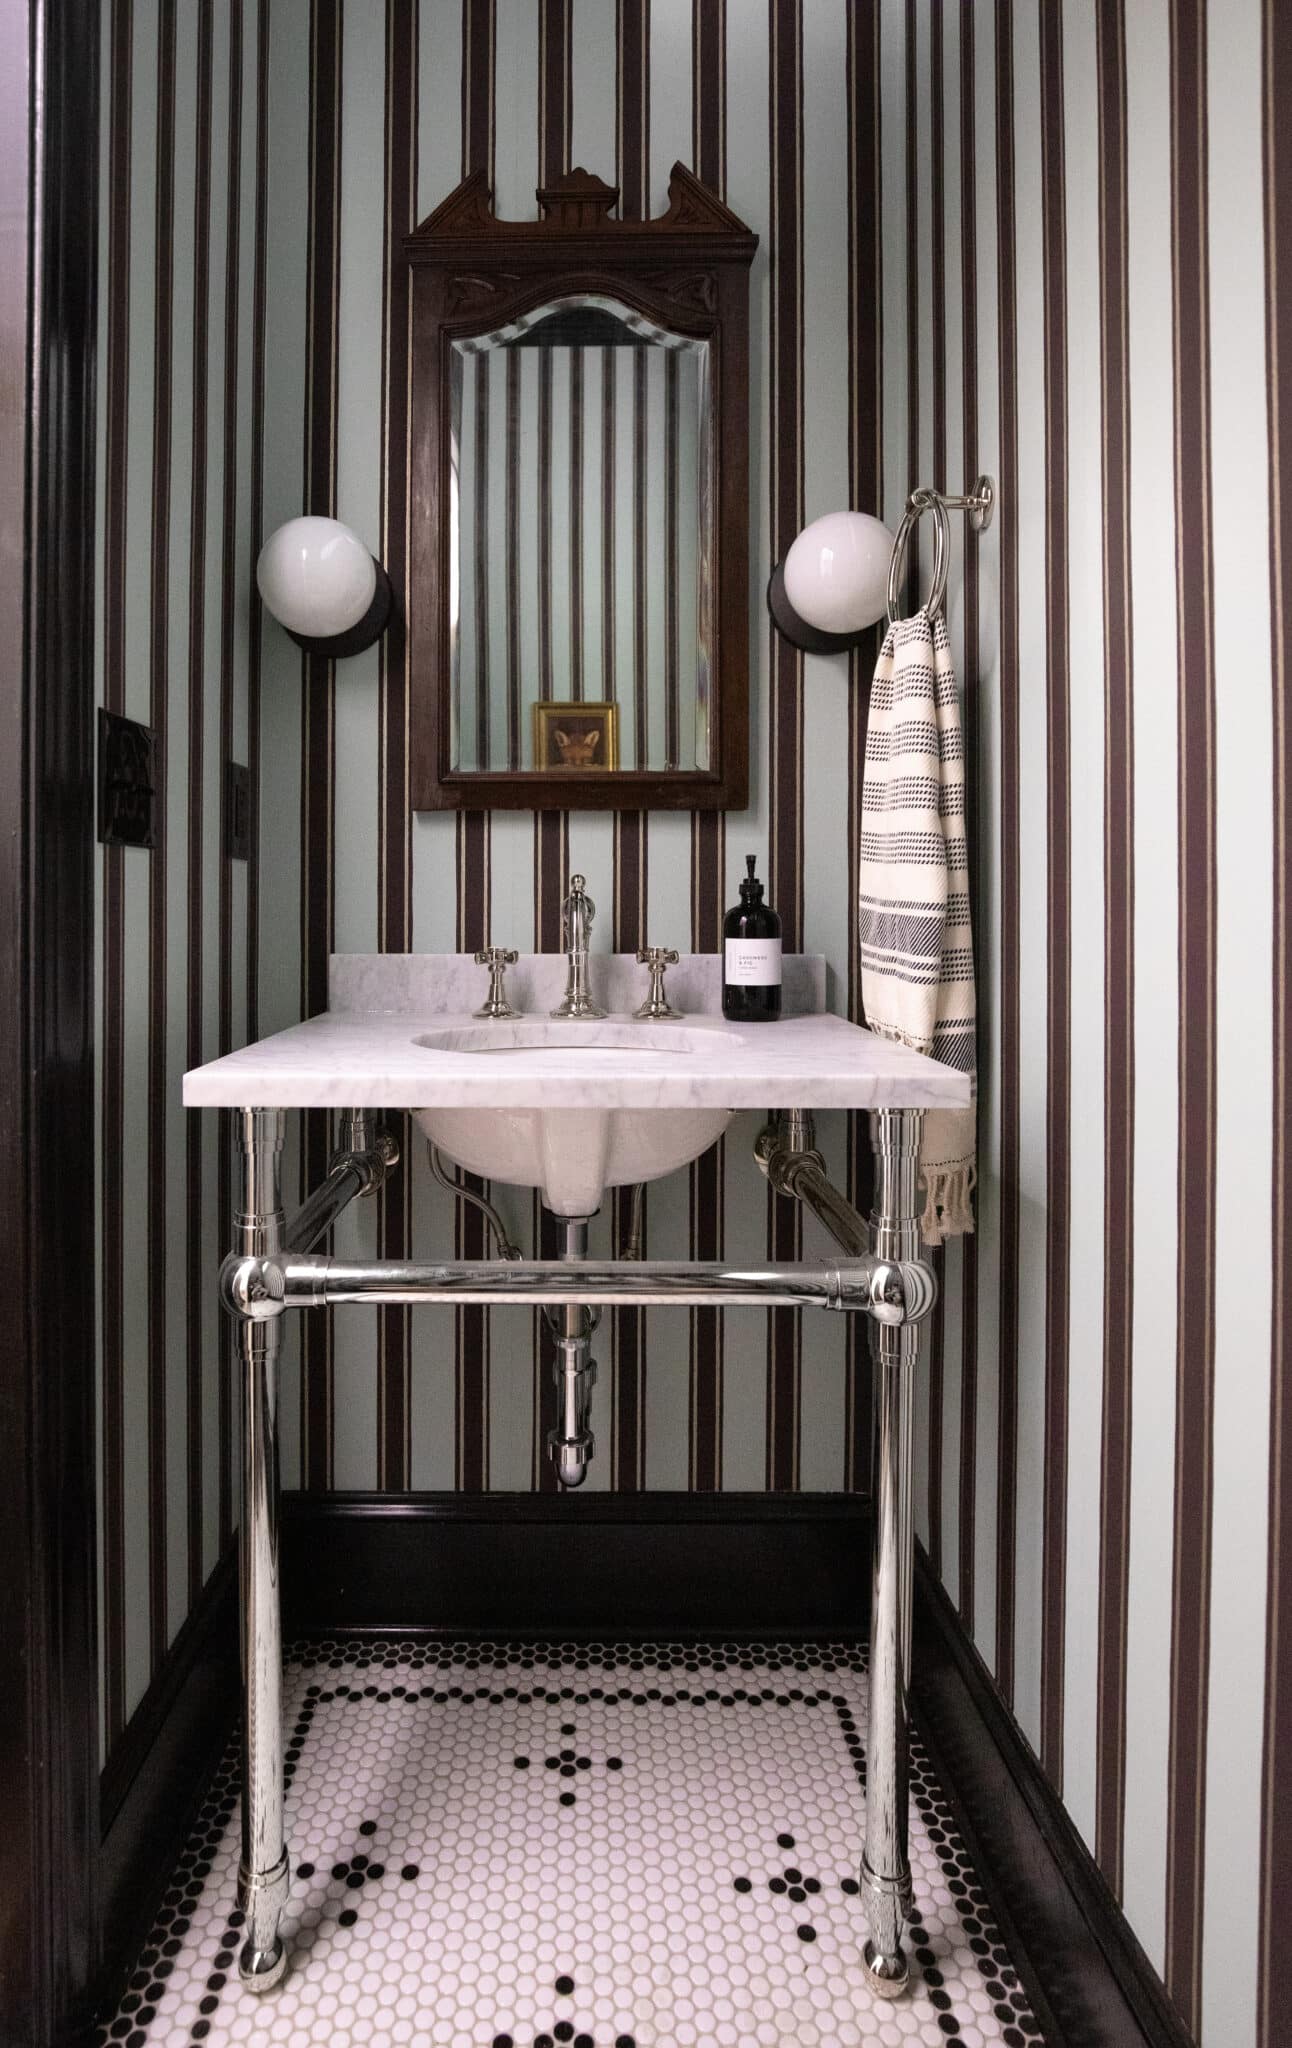 Chris Loves Julia | Defining My Design Style: Moody Modern Traditional | The Powder Room